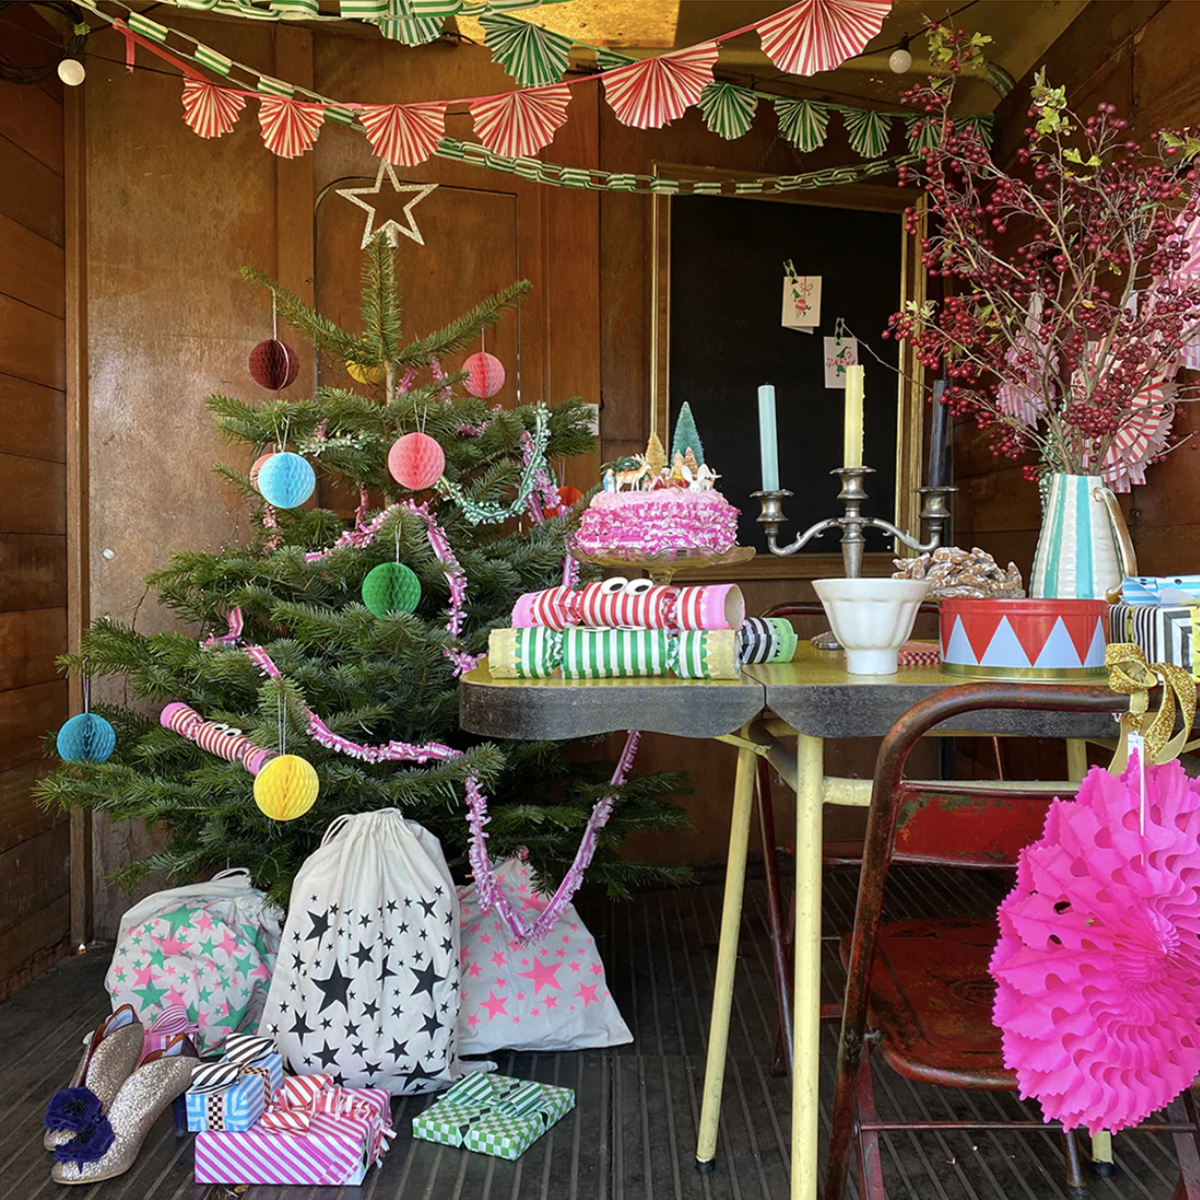 Colour Christmas with paper decoration on ceiling, small paper balls on the Christmas tree and star printed fabric gift bags by Petra Boase. Gift guide by Sophie Robinson